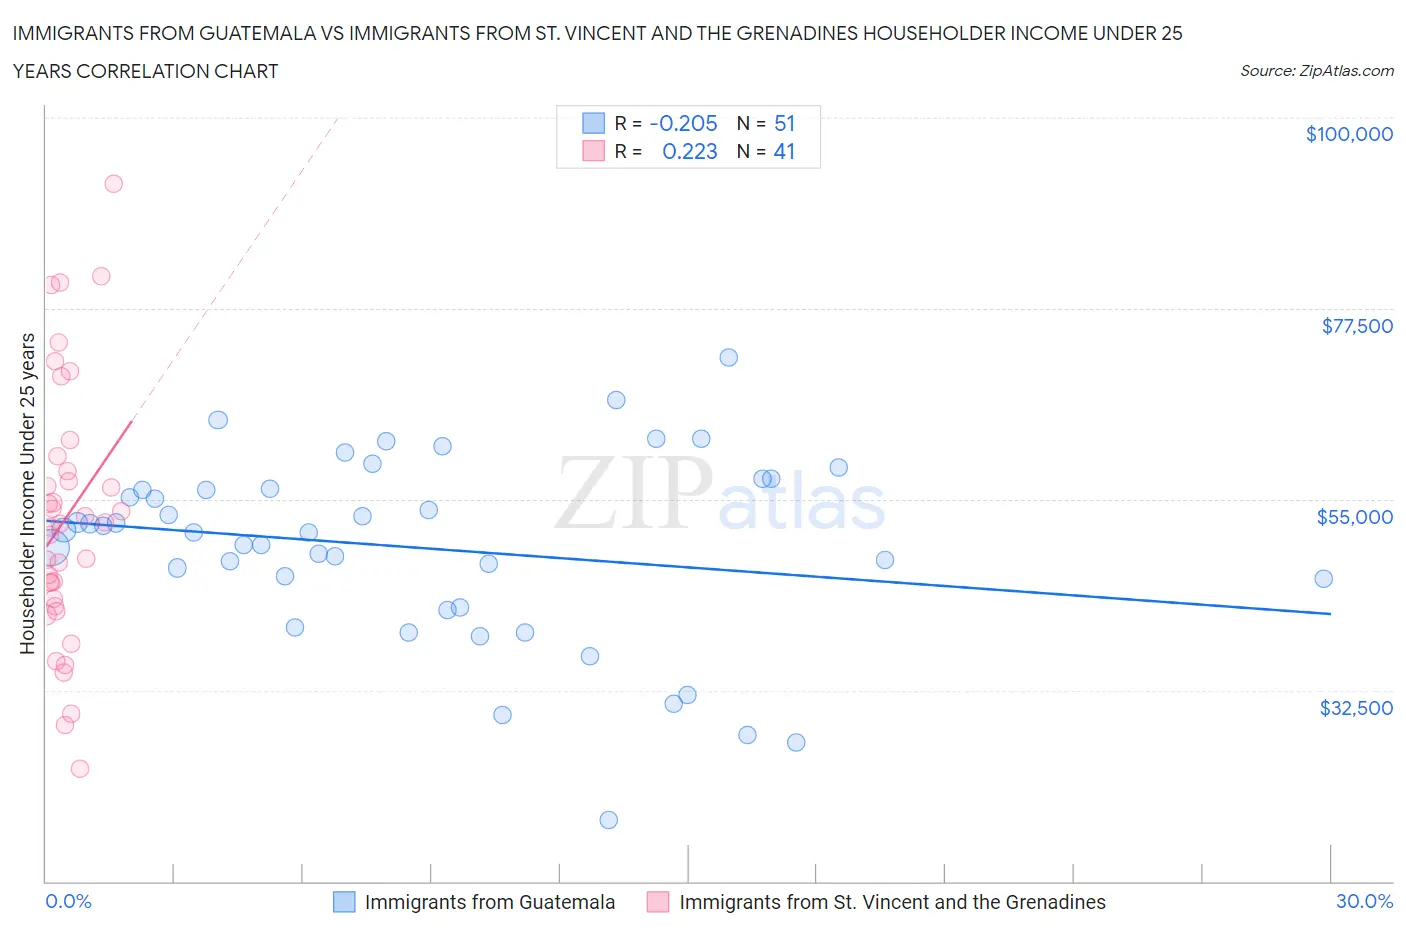 Immigrants from Guatemala vs Immigrants from St. Vincent and the Grenadines Householder Income Under 25 years